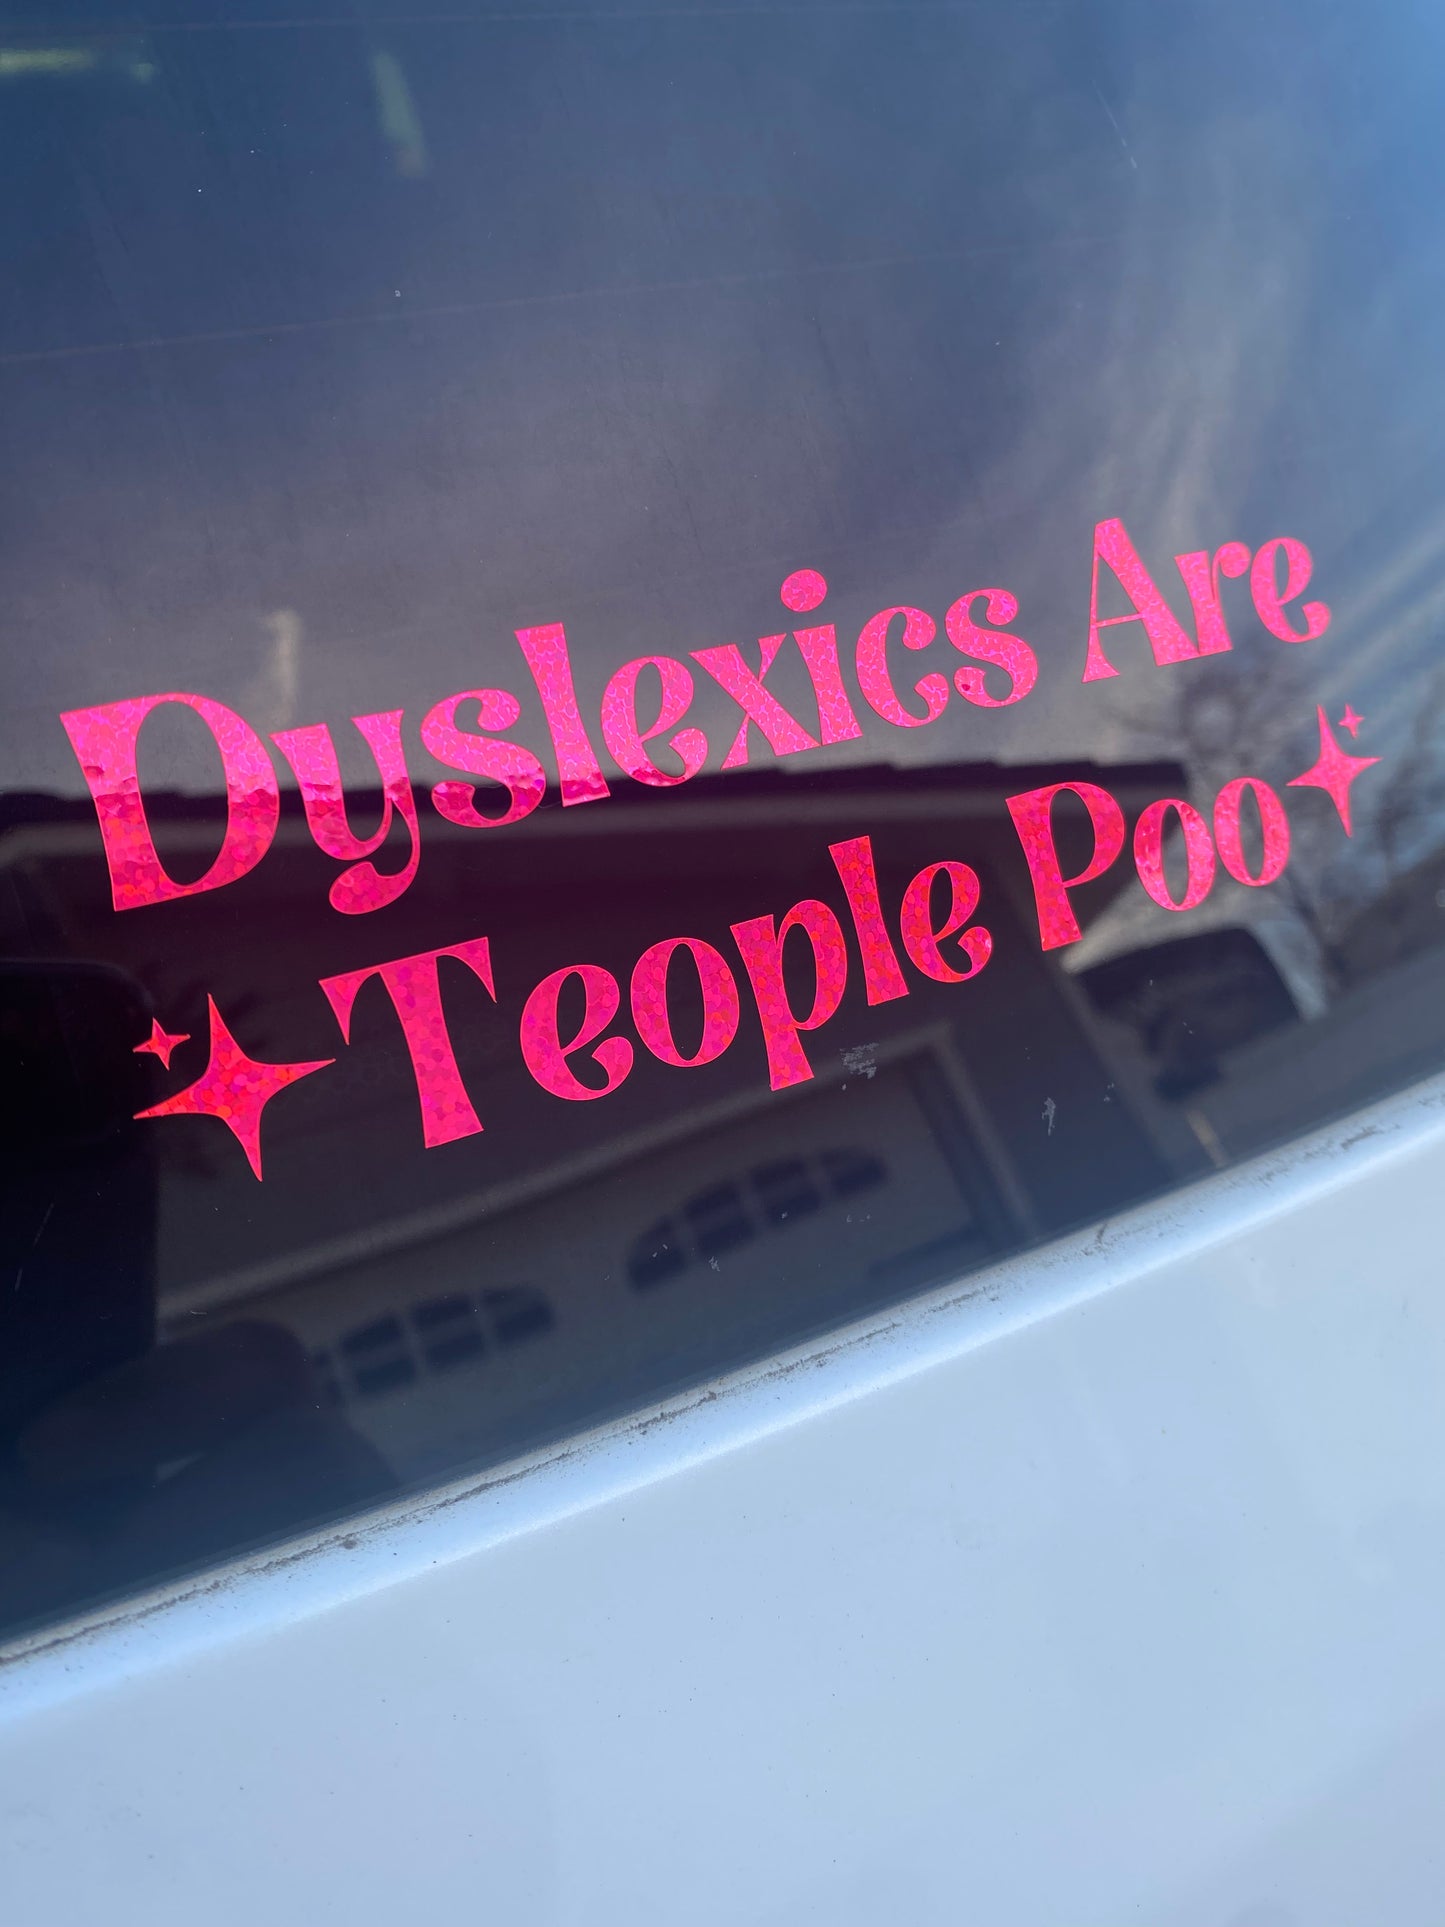 Dyslexics Are People Too Car Decal